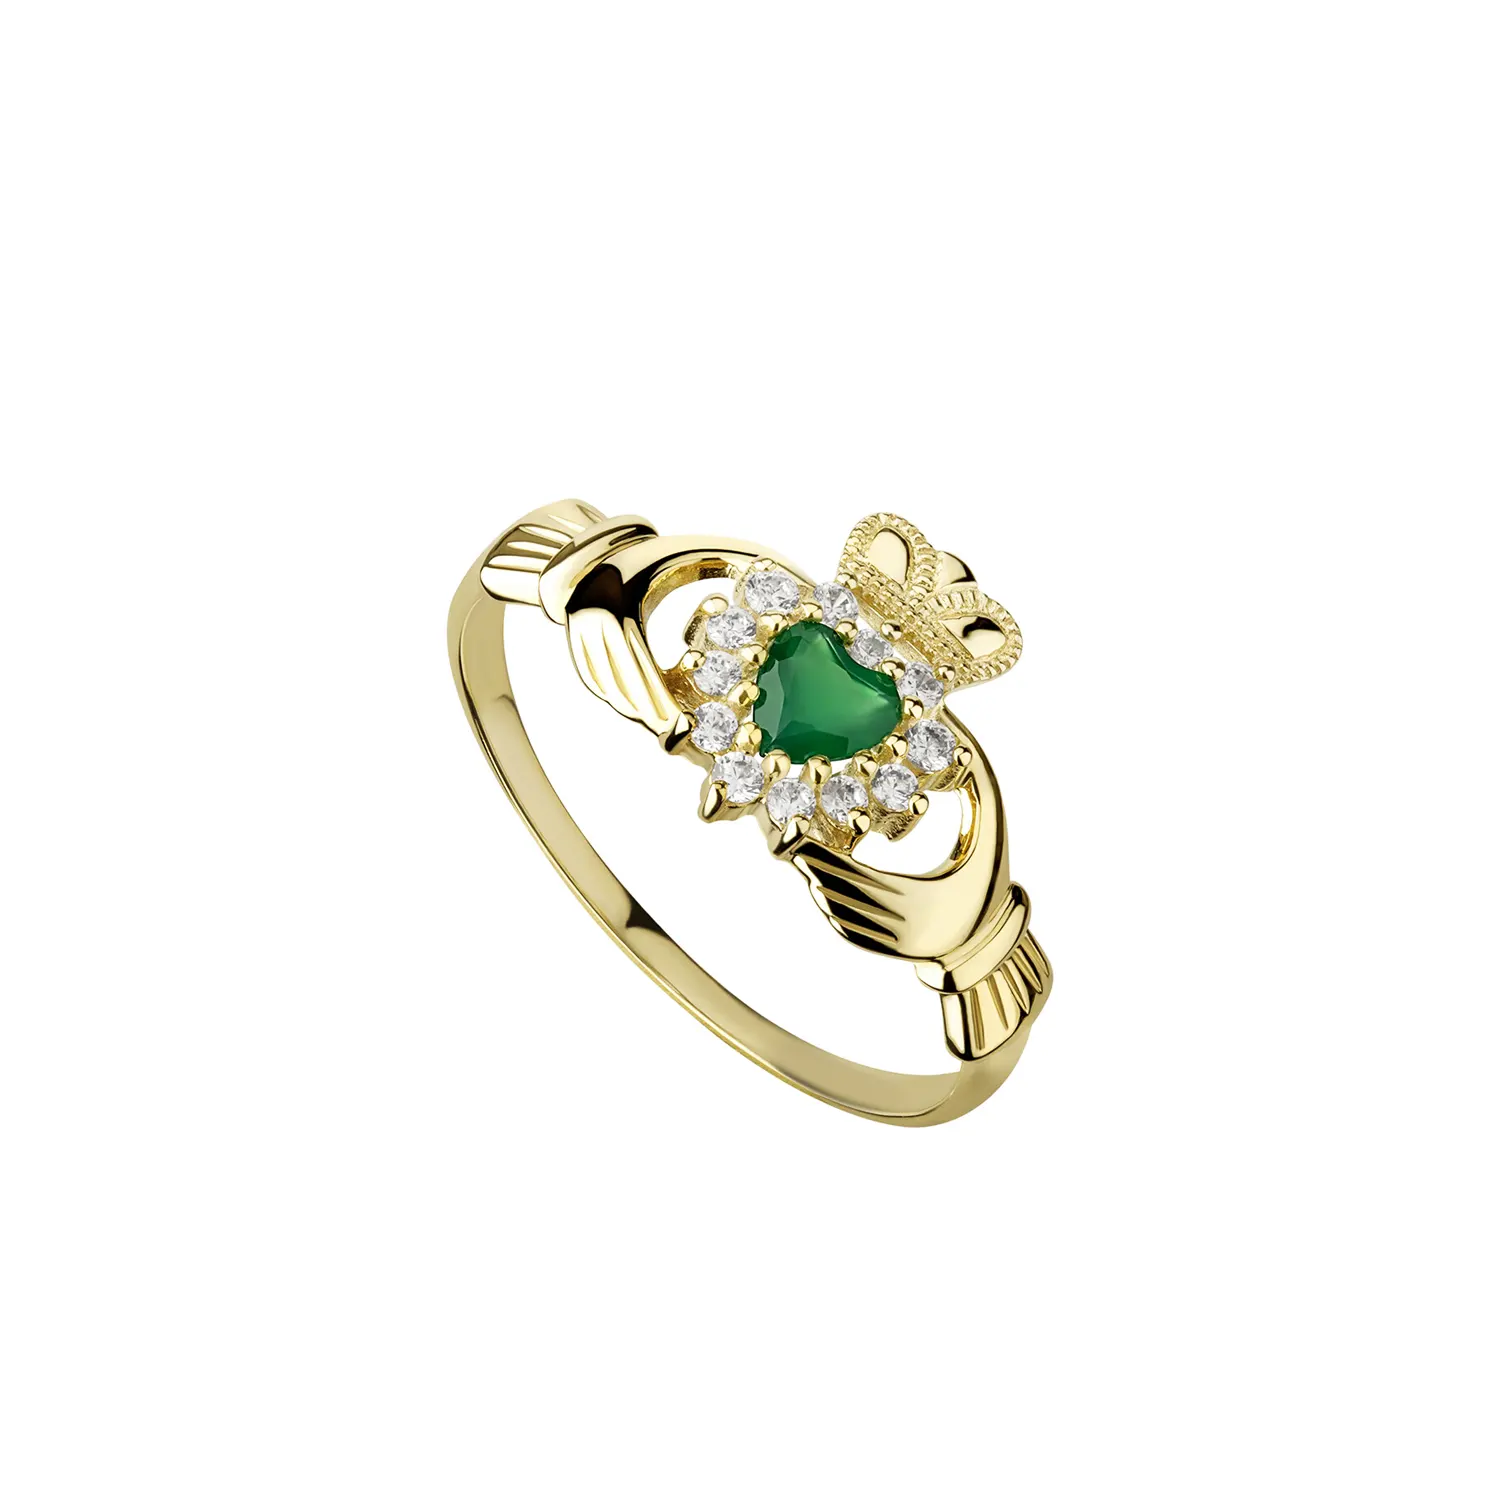 9ct. Yellow Gold Claddagh Ring - Green Agate & CZ